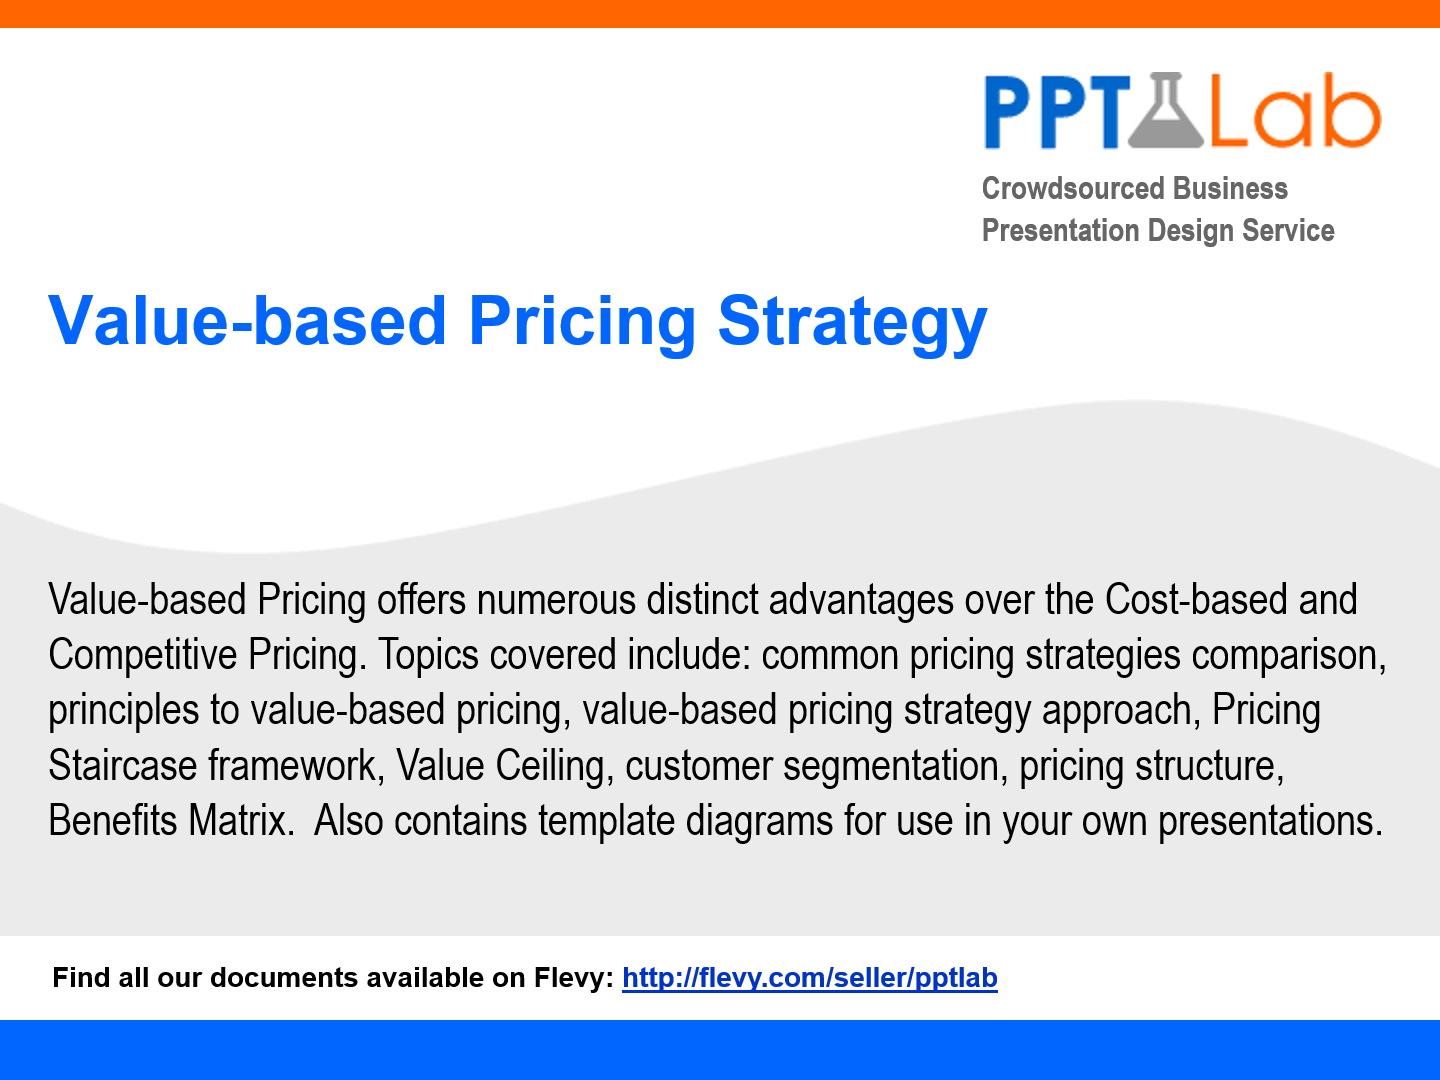 Value-based Pricing Strategy